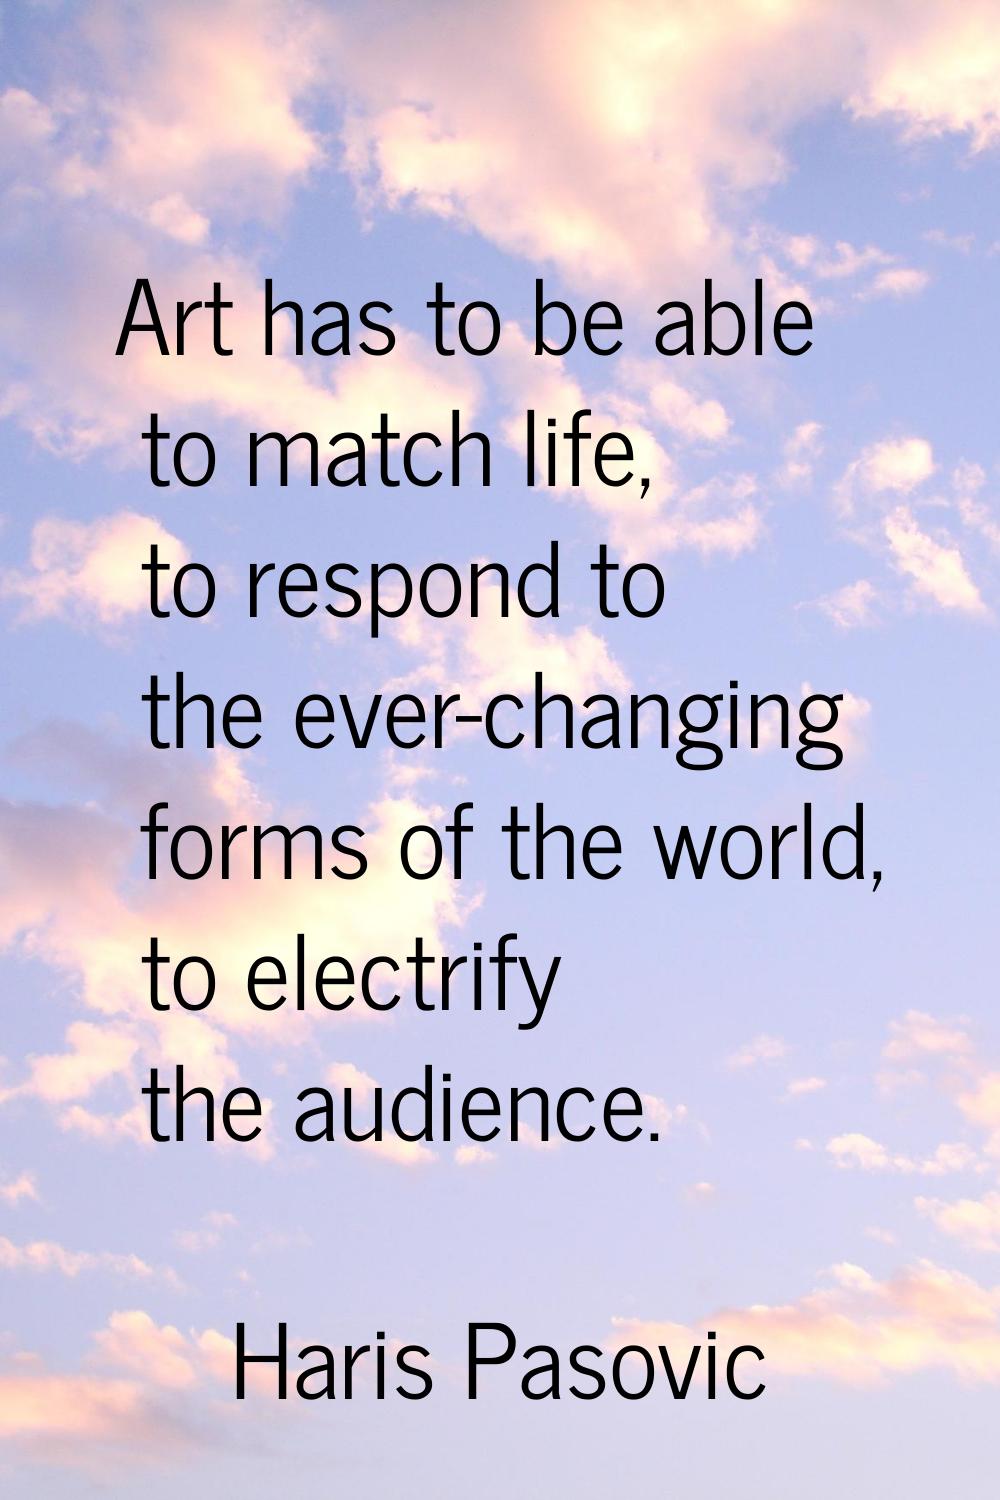 Art has to be able to match life, to respond to the ever-changing forms of the world, to electrify 